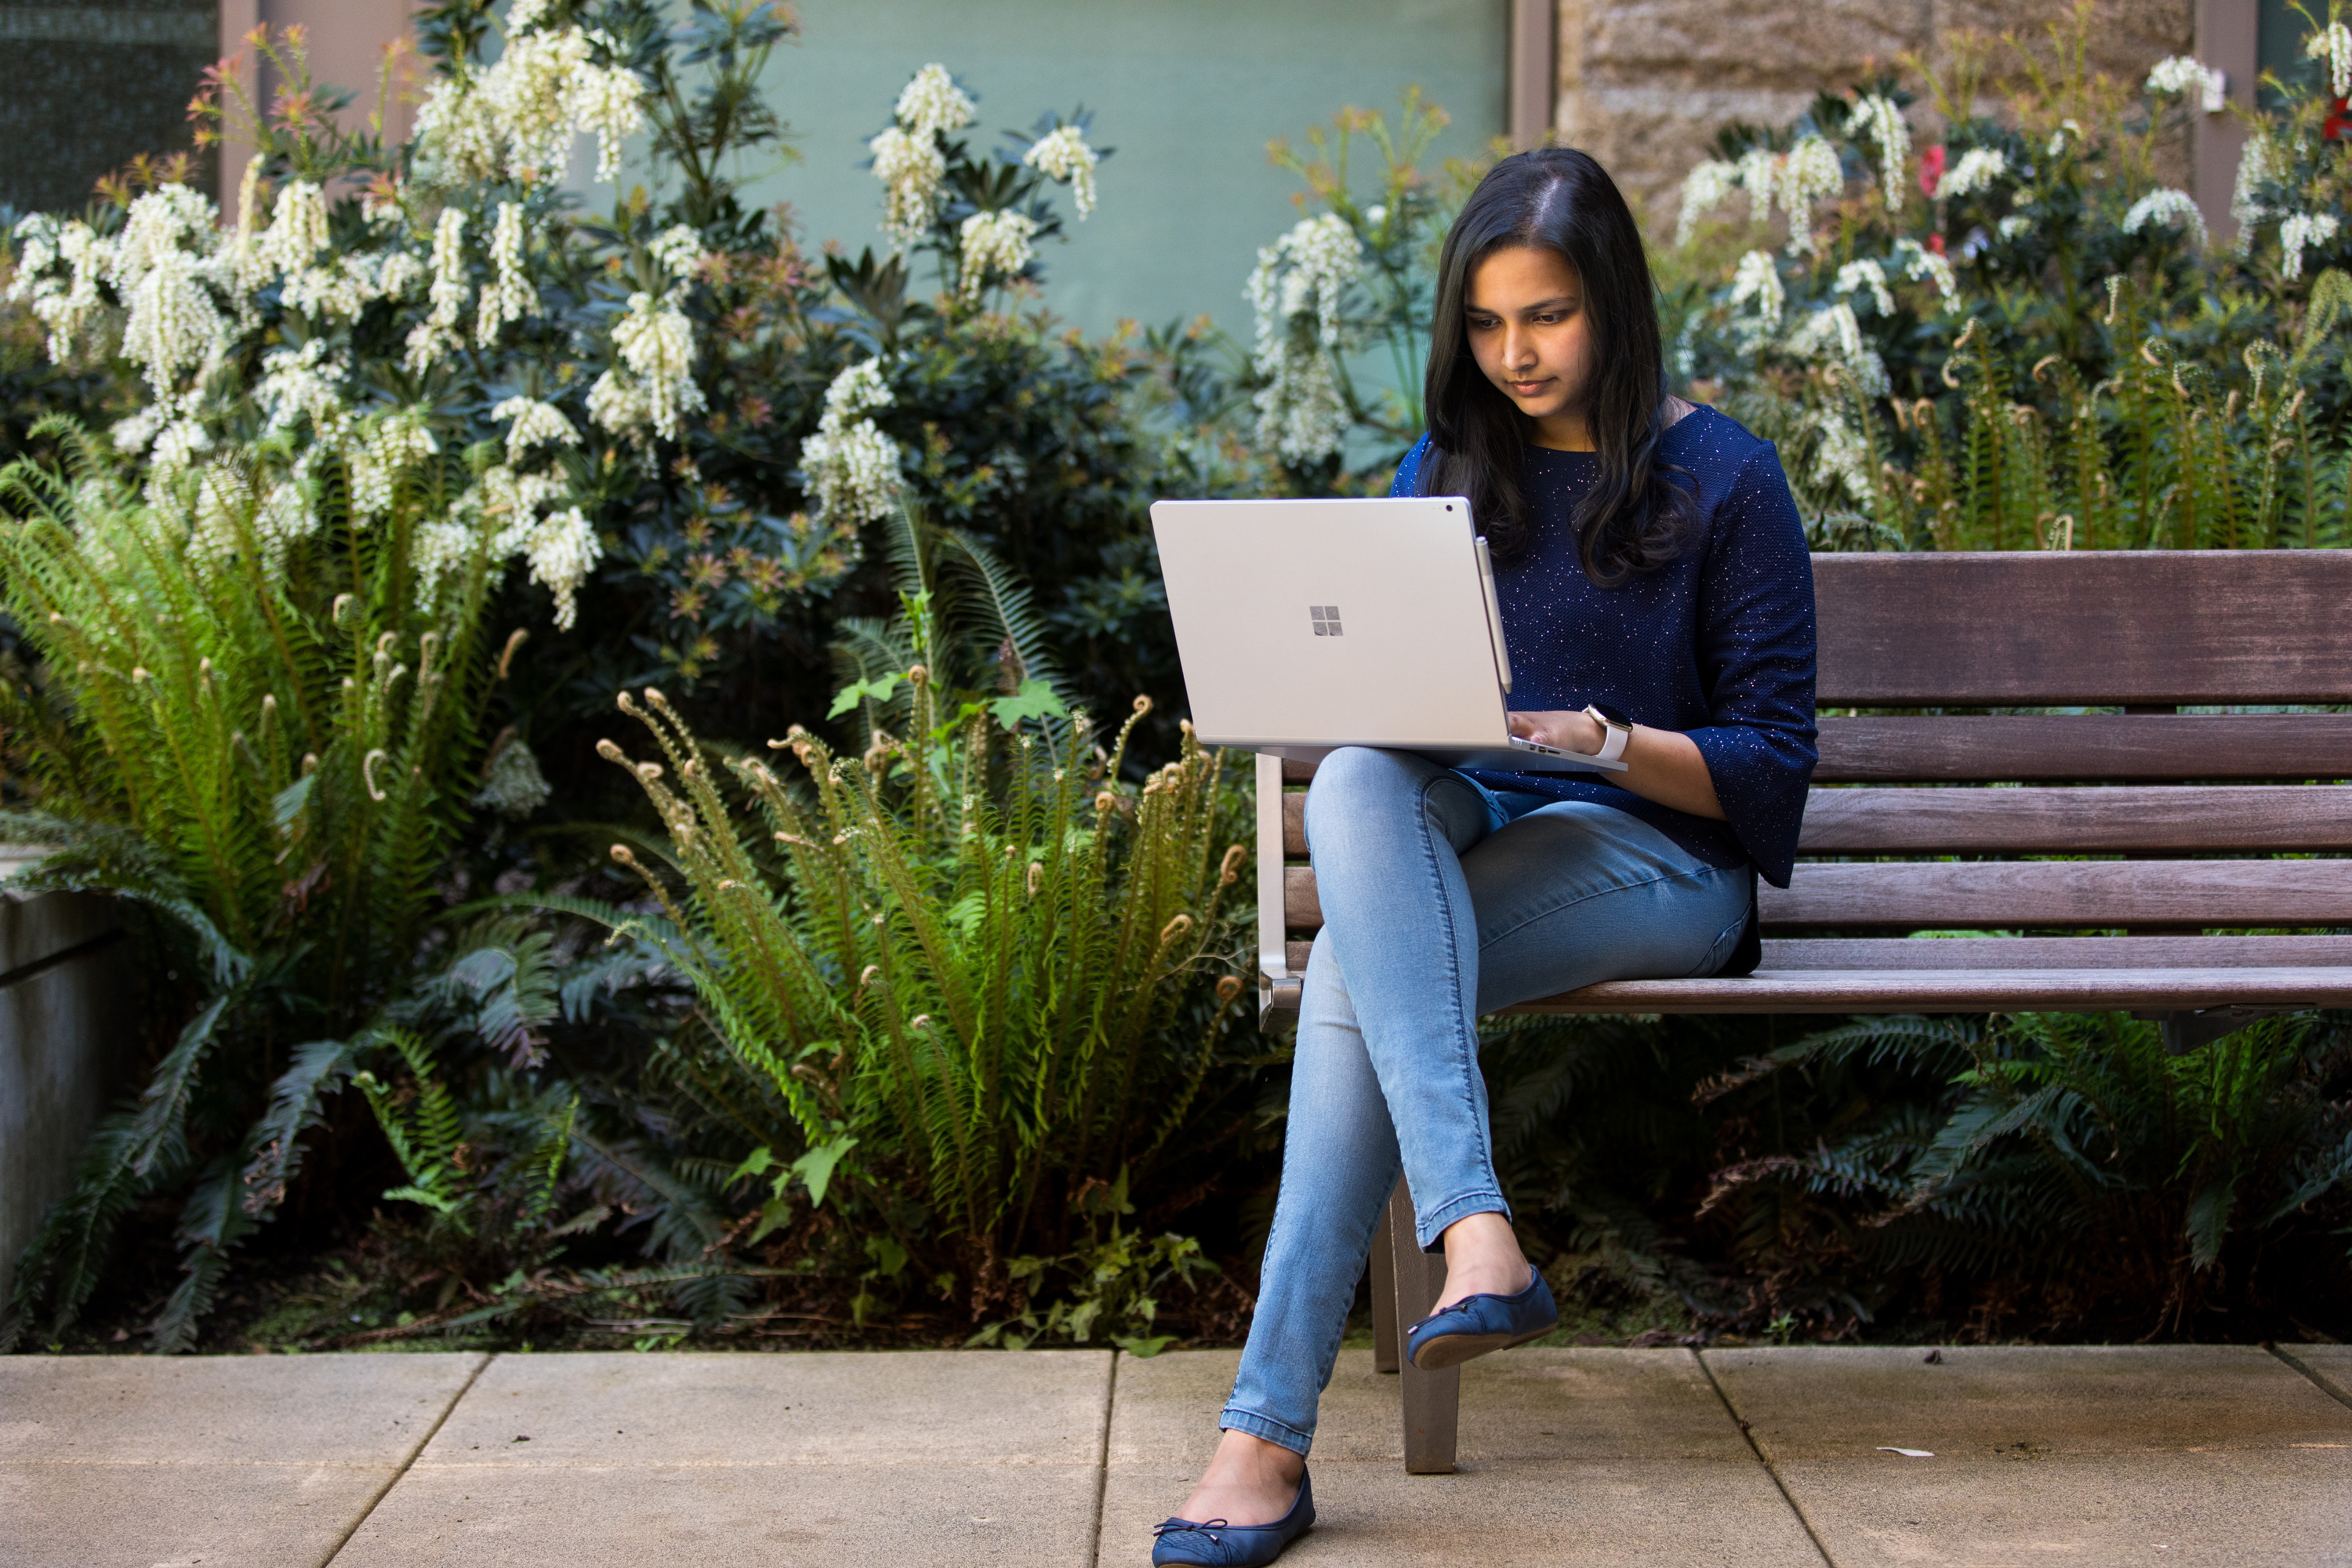 Photo of a woman sitting on a bench and working on a laptop